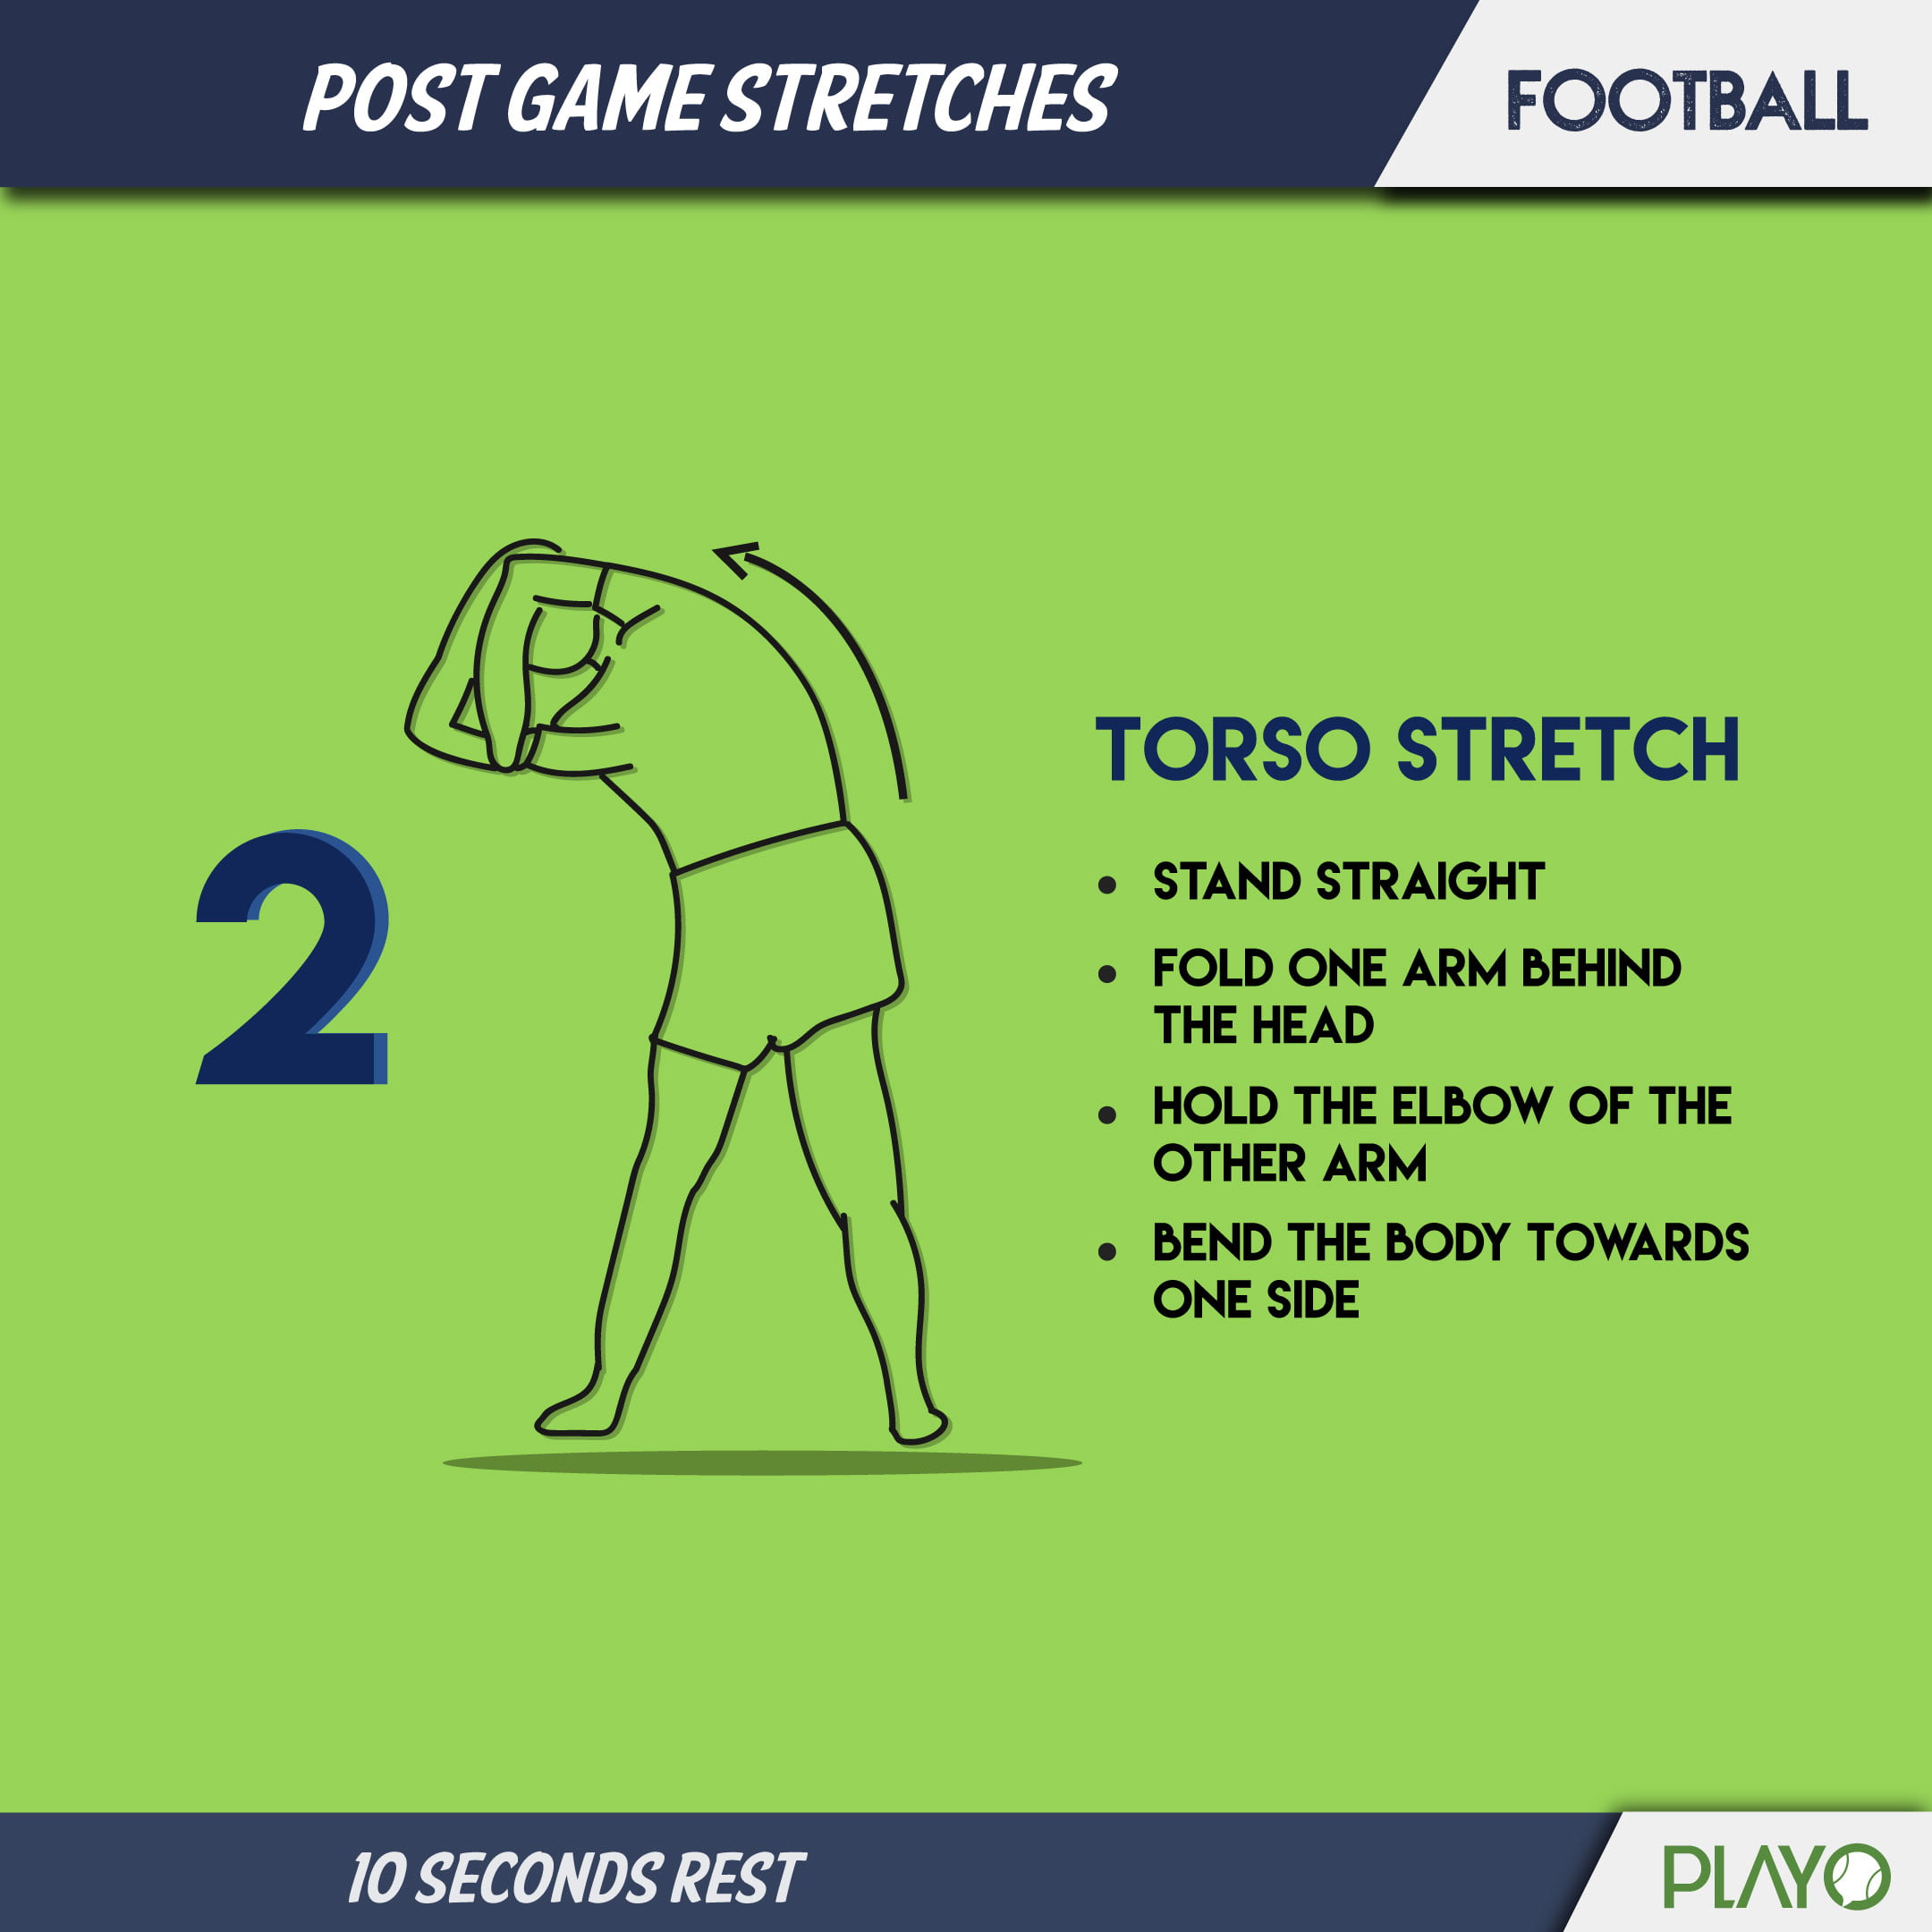 Torso stretch for cool down after football